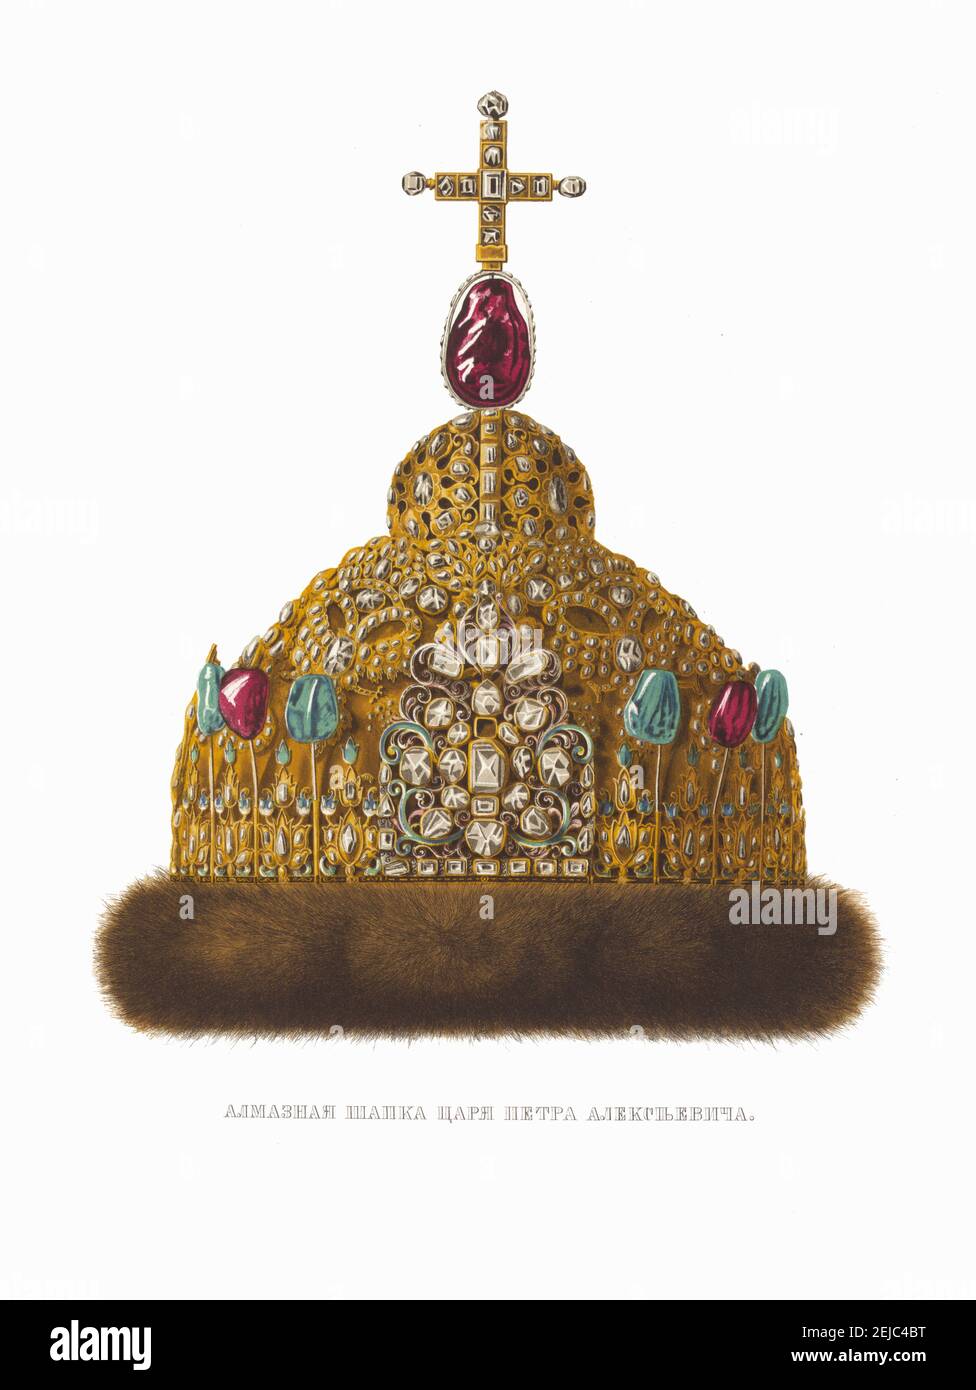 Diamond Cap of Tsar Peter I. From the Antiquities of the Russian State. Museum: PRIVATE COLLECTION. Author: Fyodor Grigoryevich Solntsev. Stock Photo